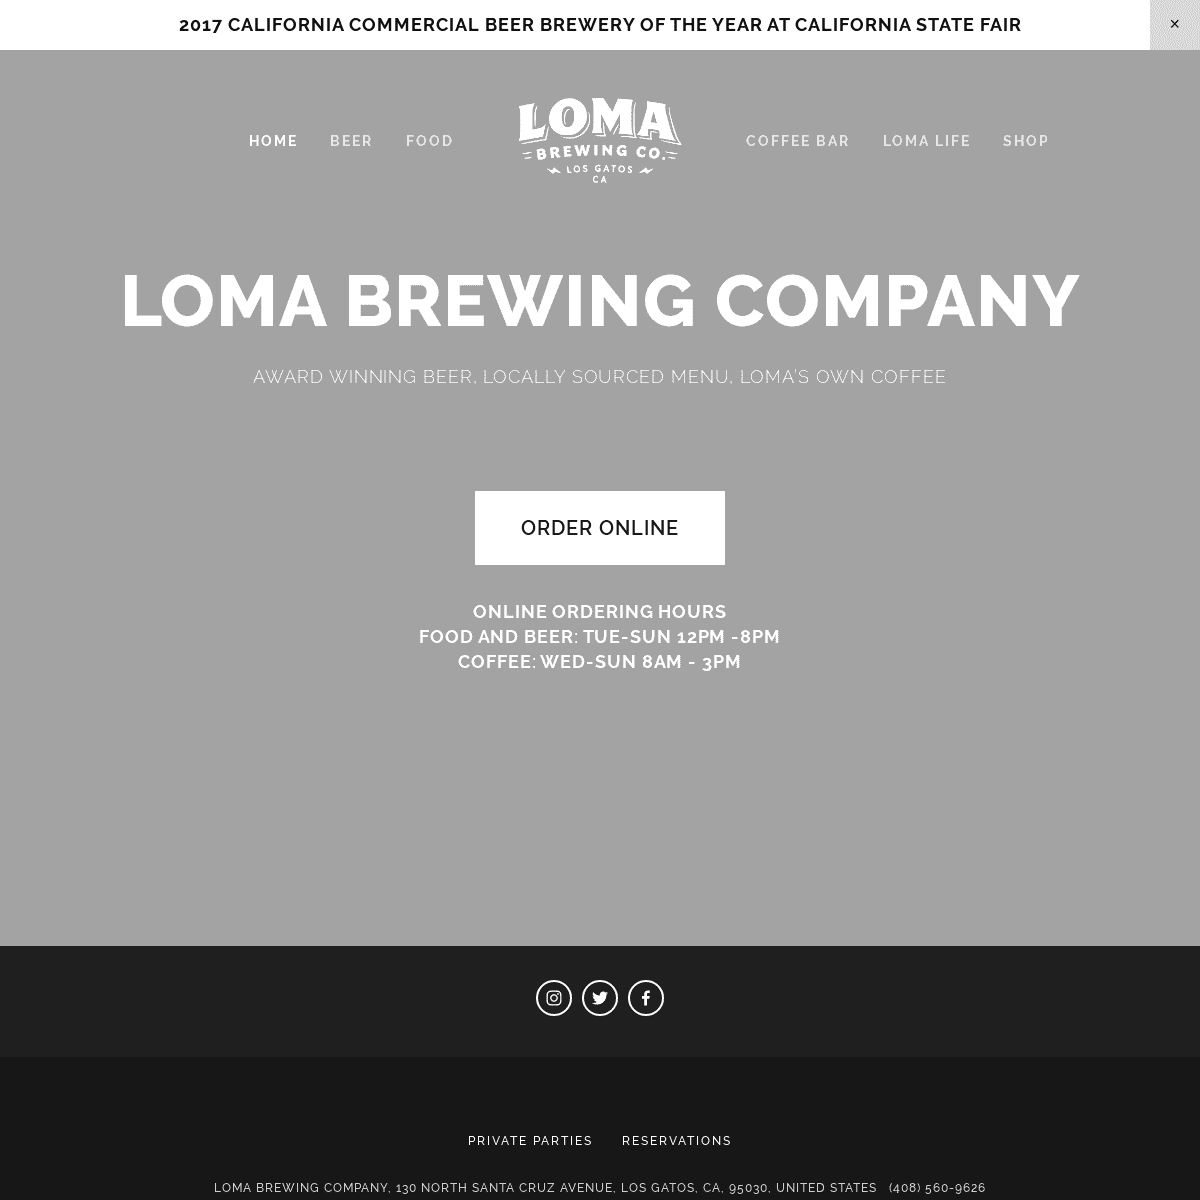 A complete backup of lomabrew.com